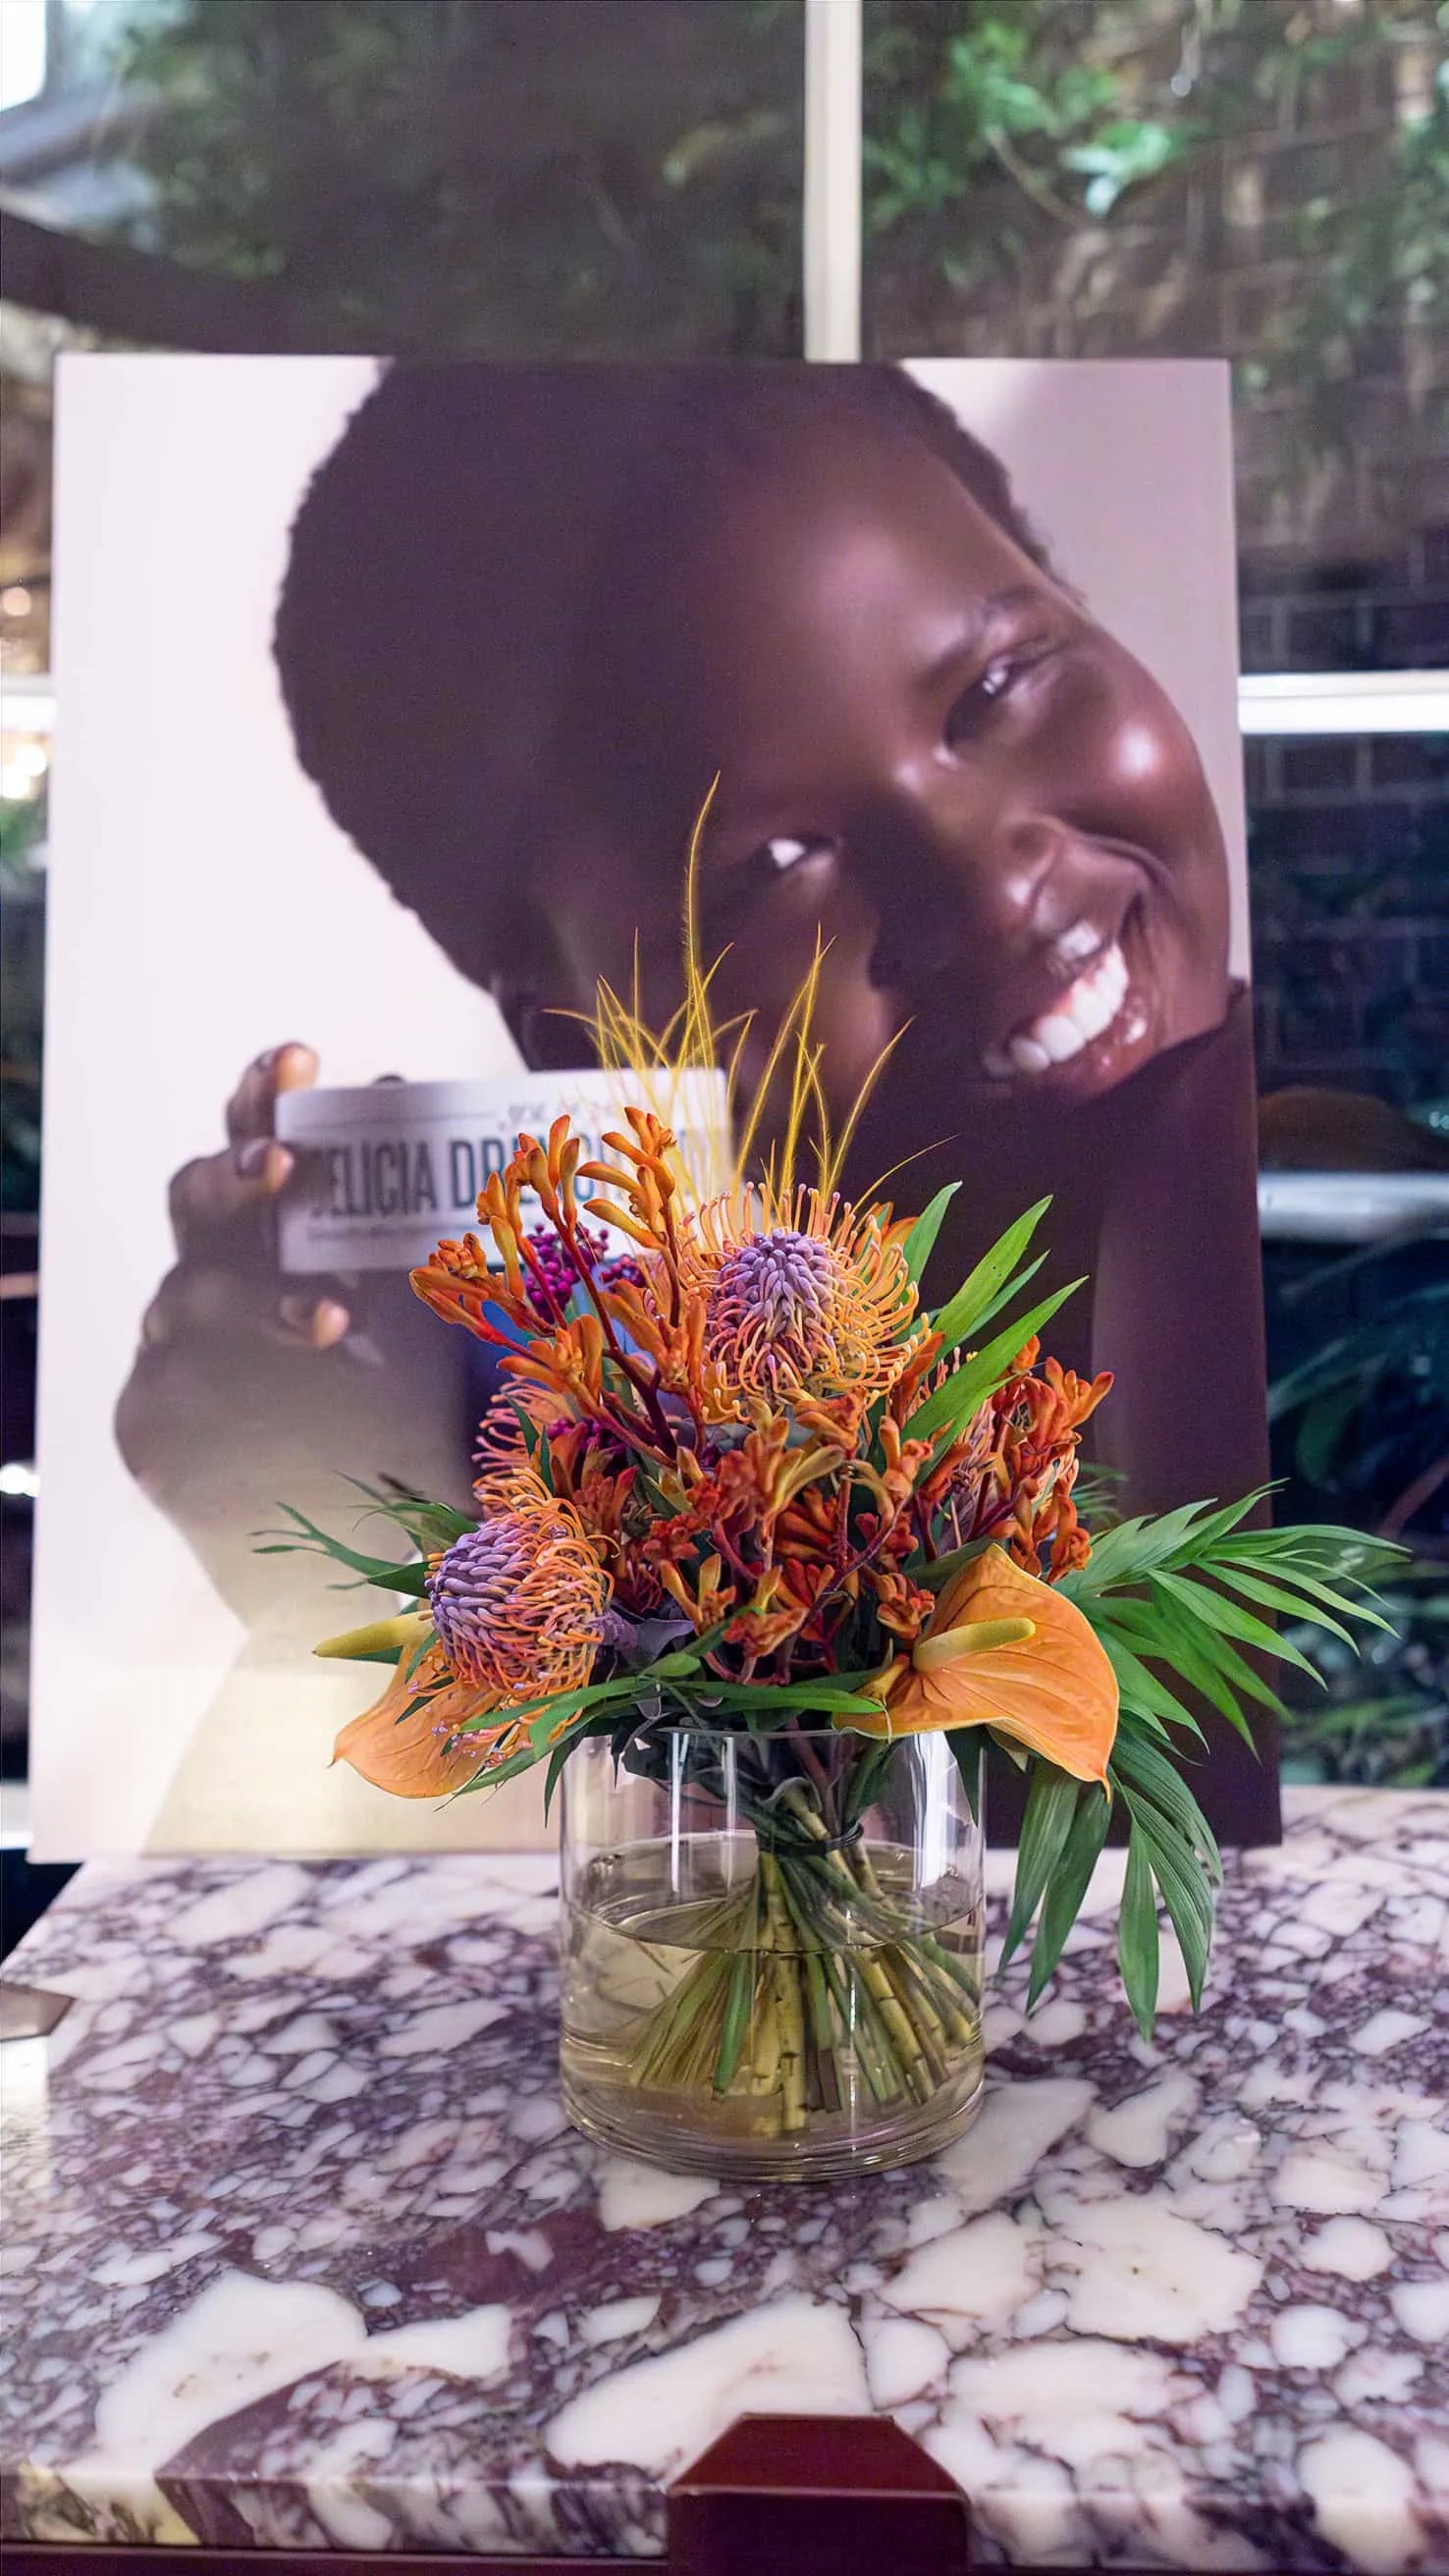 Colorful floral arrangement by Amaranté London in a clear vase on a marble table, complementing the joyful theme of Sol de Janeiro's advertisement in the background.